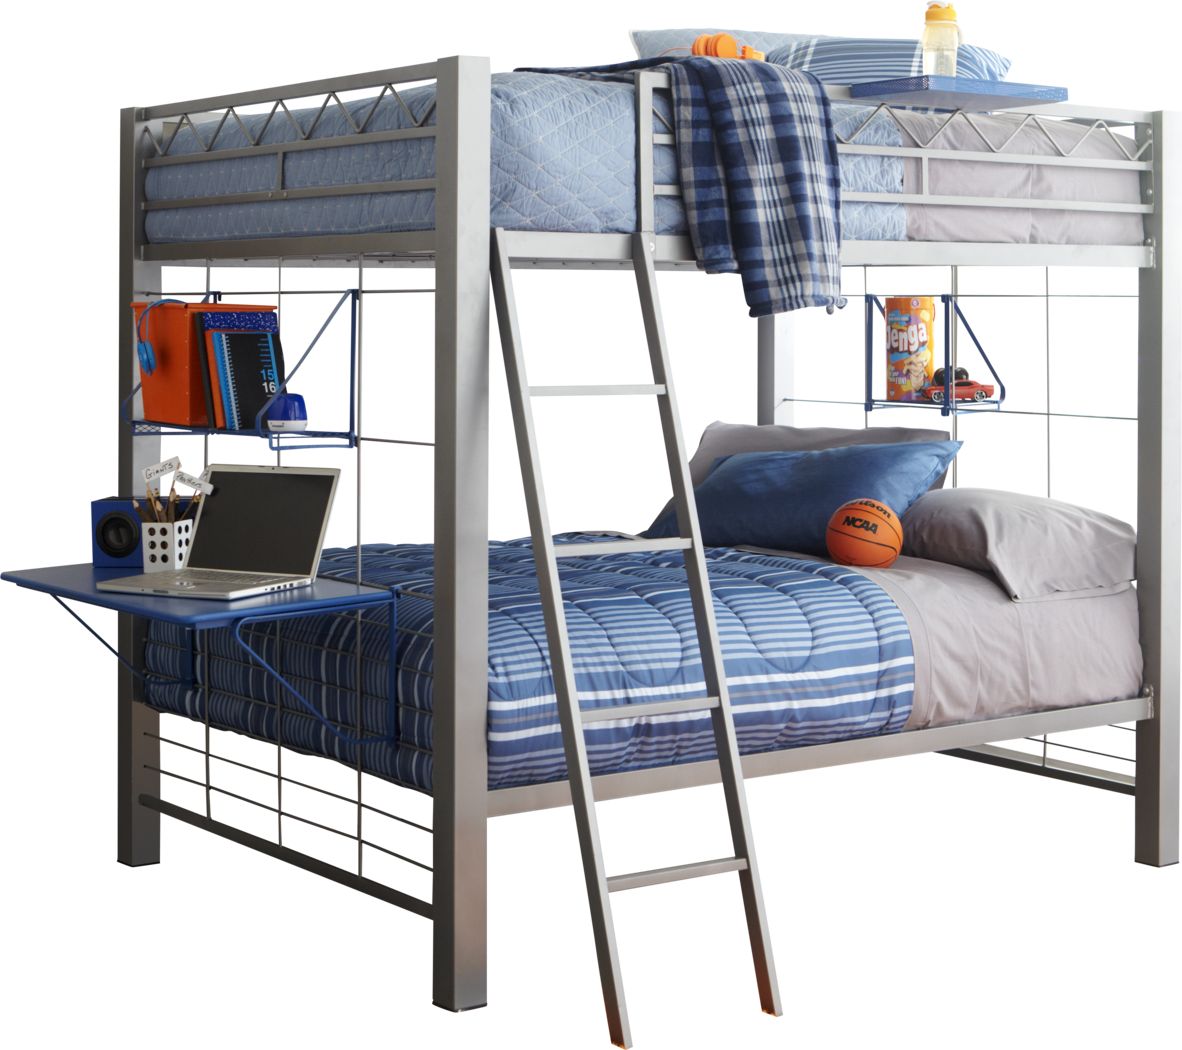 Rooms To Go Triple Bunk Beds New Daily, Bunk Beds Rooms To Go Kids